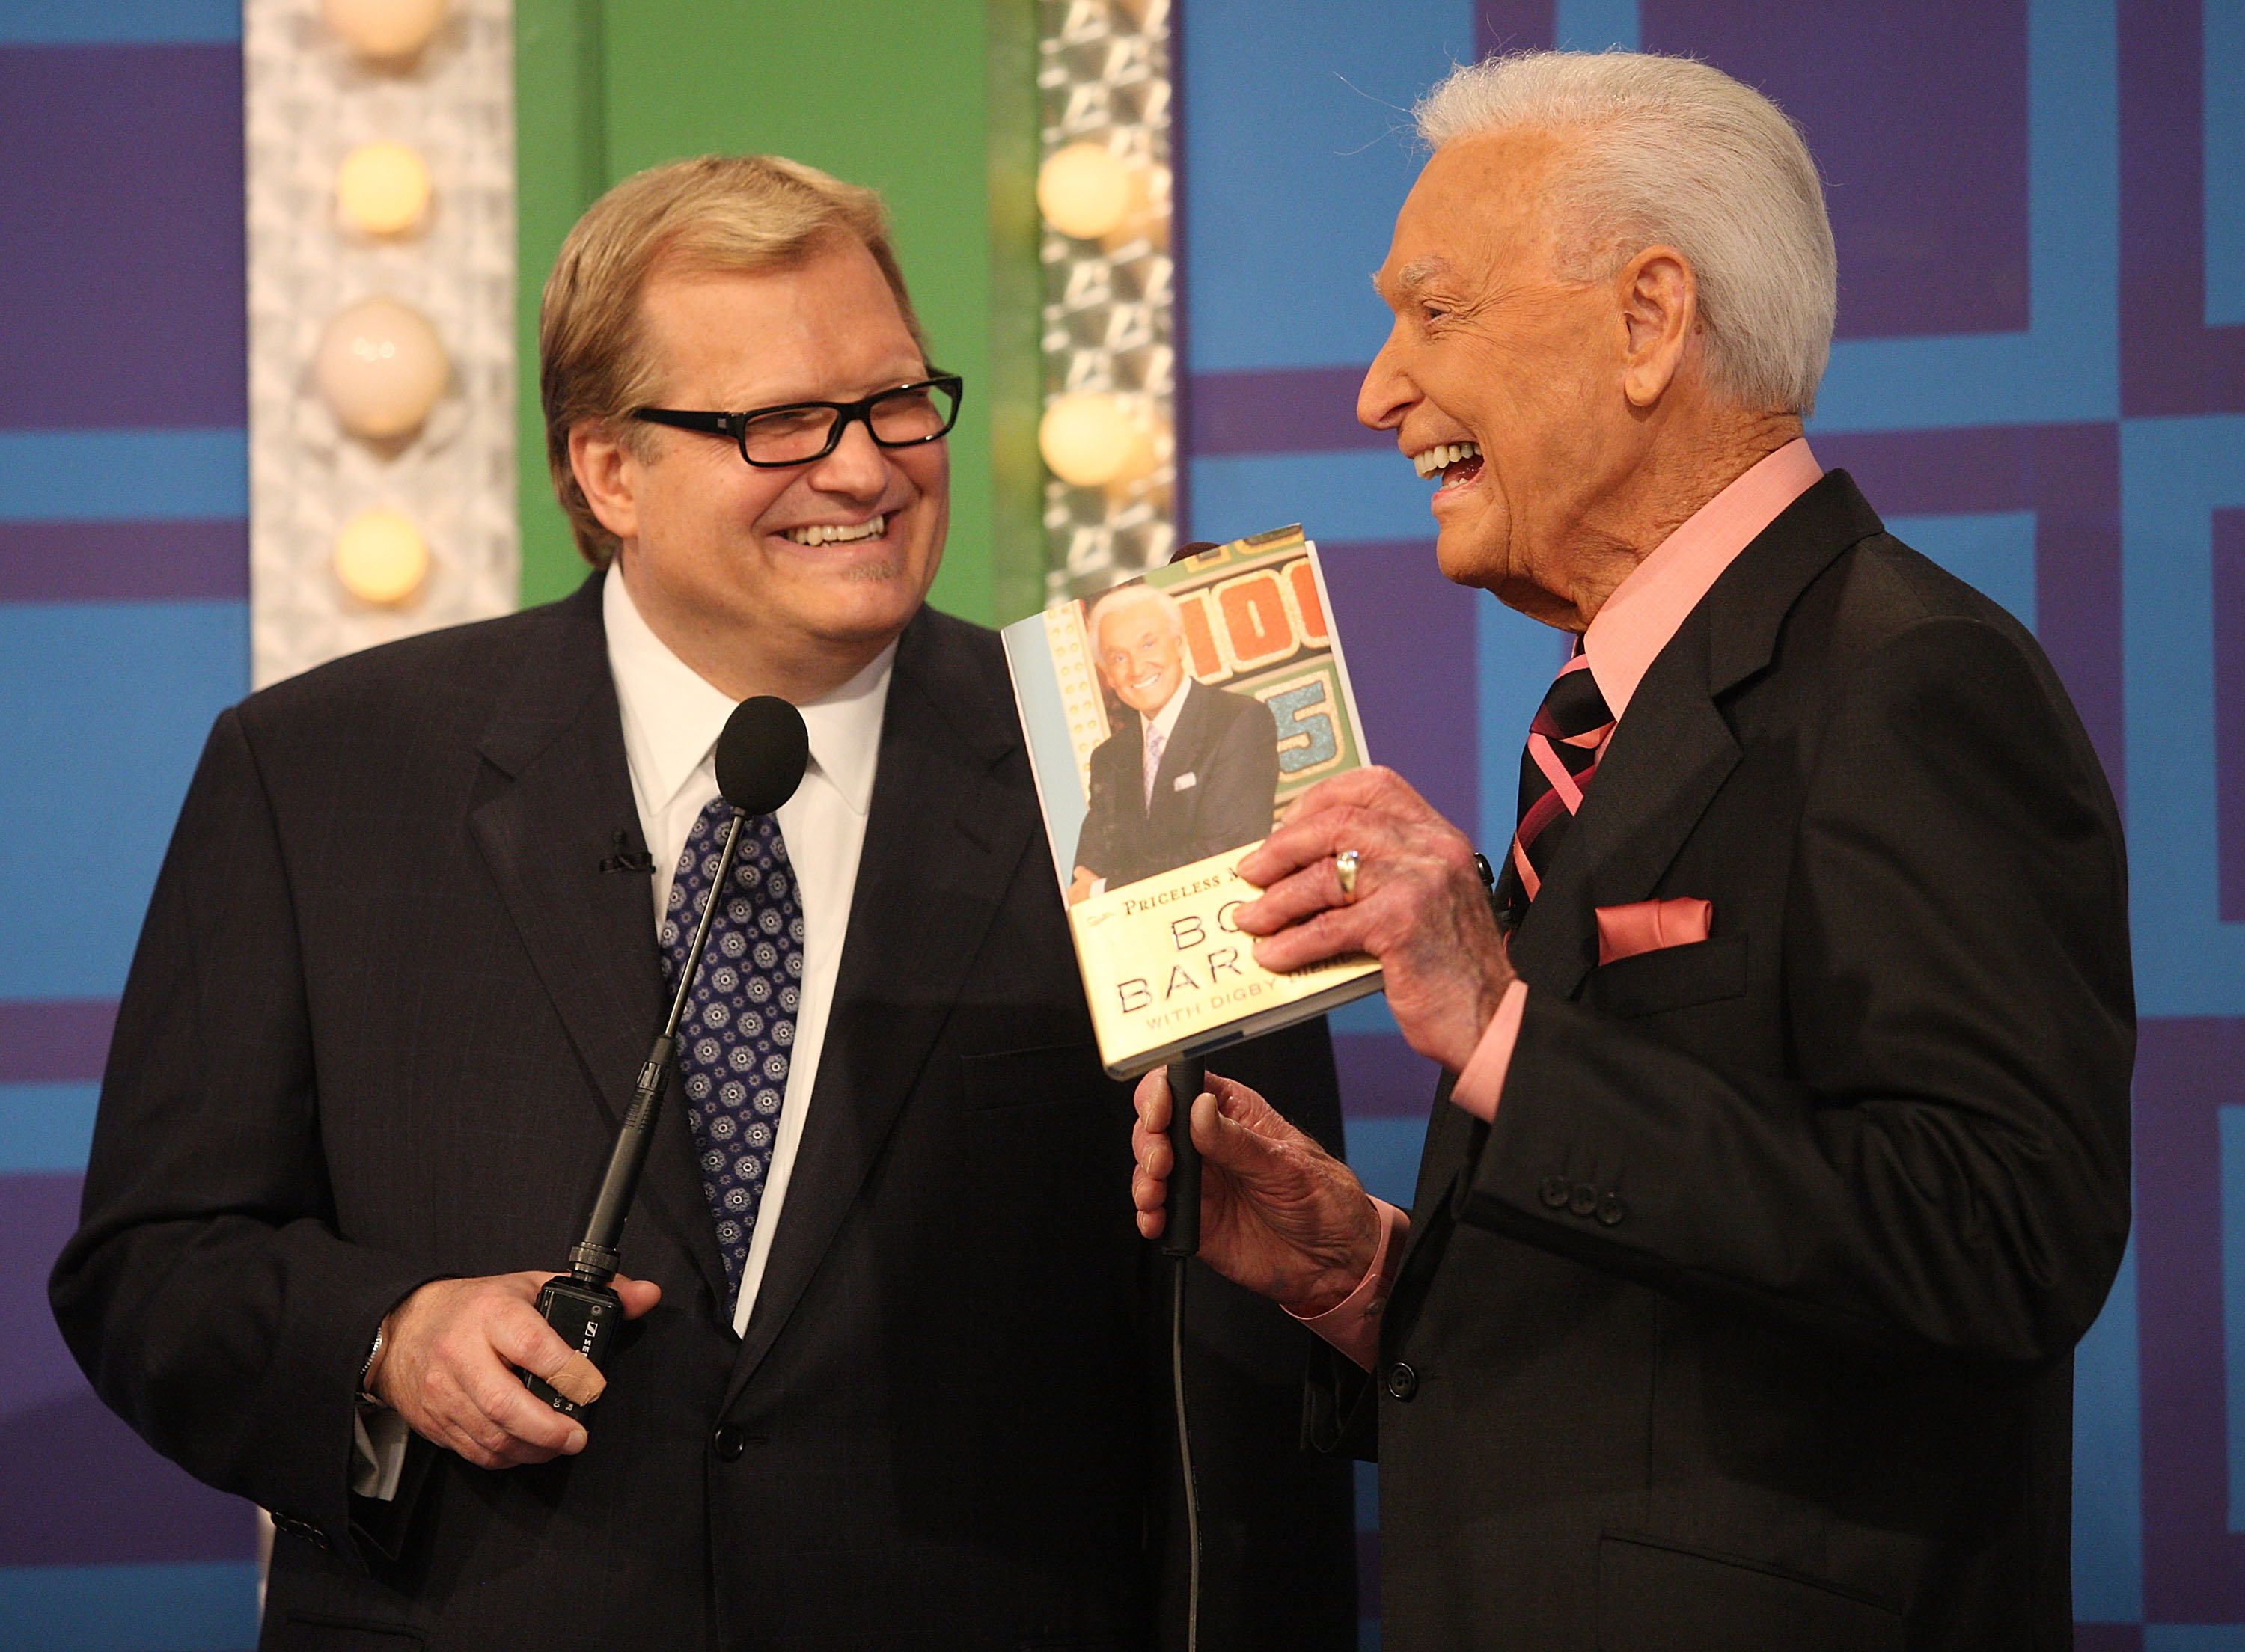 Host Drew Carey and former host Bob Barker speak during a segment of "The Price Is Right" at CBS Television City, on March 25, 2009, in Los Angeles, California. | Source: Getty Images